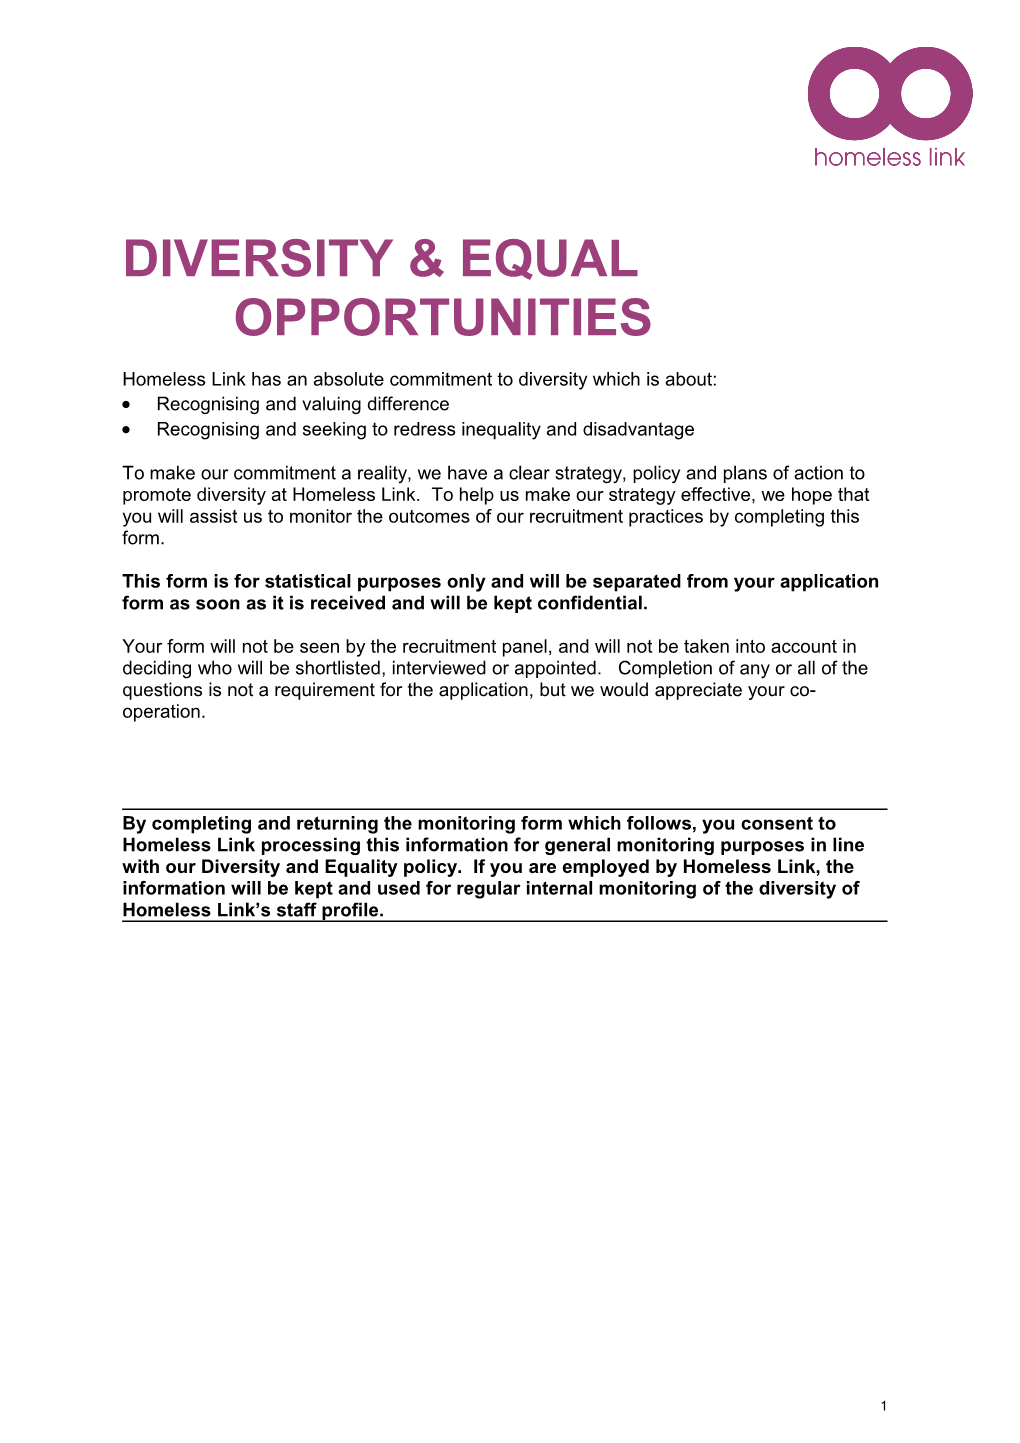 Diversity & Equal Opportunities